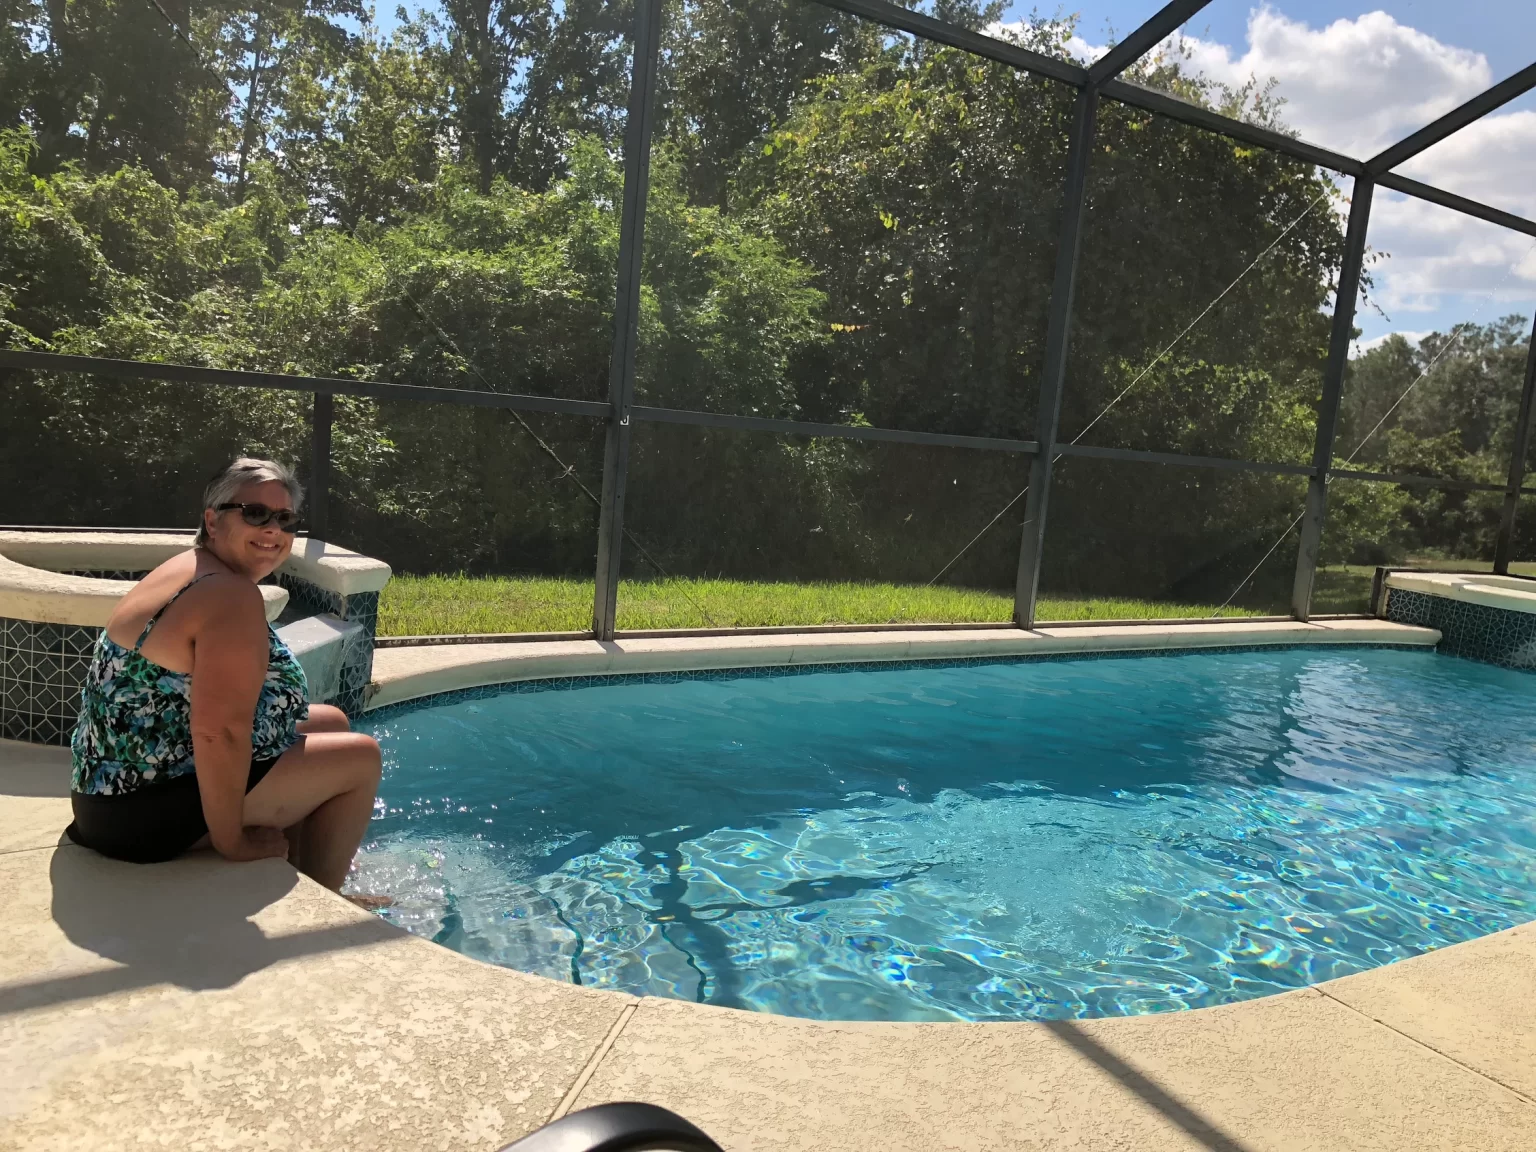 Florida 18 – T2 – Day 7 – Winter Park